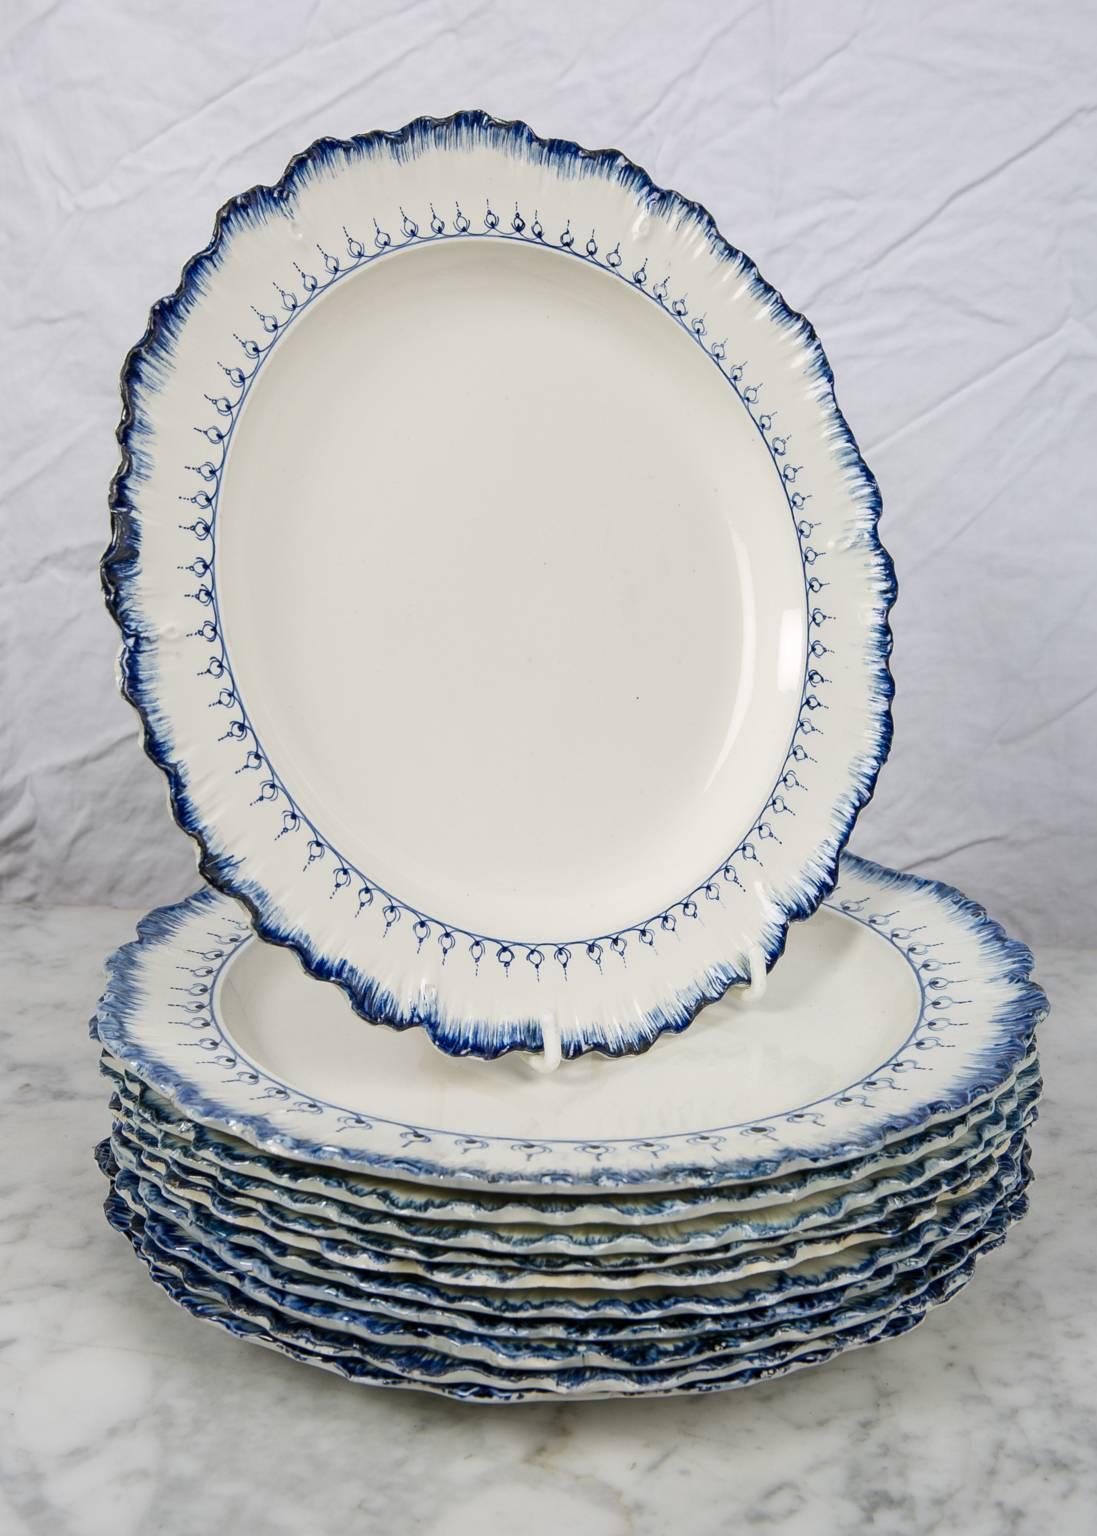 Set of 10 Wedgwood blue and white antique dishes in the highly desirable Mared pattern. These dishes were made in the 18th century, circa 1785. The Mared pattern is painted in under-glaze blue pearlware. The border features a design showing a